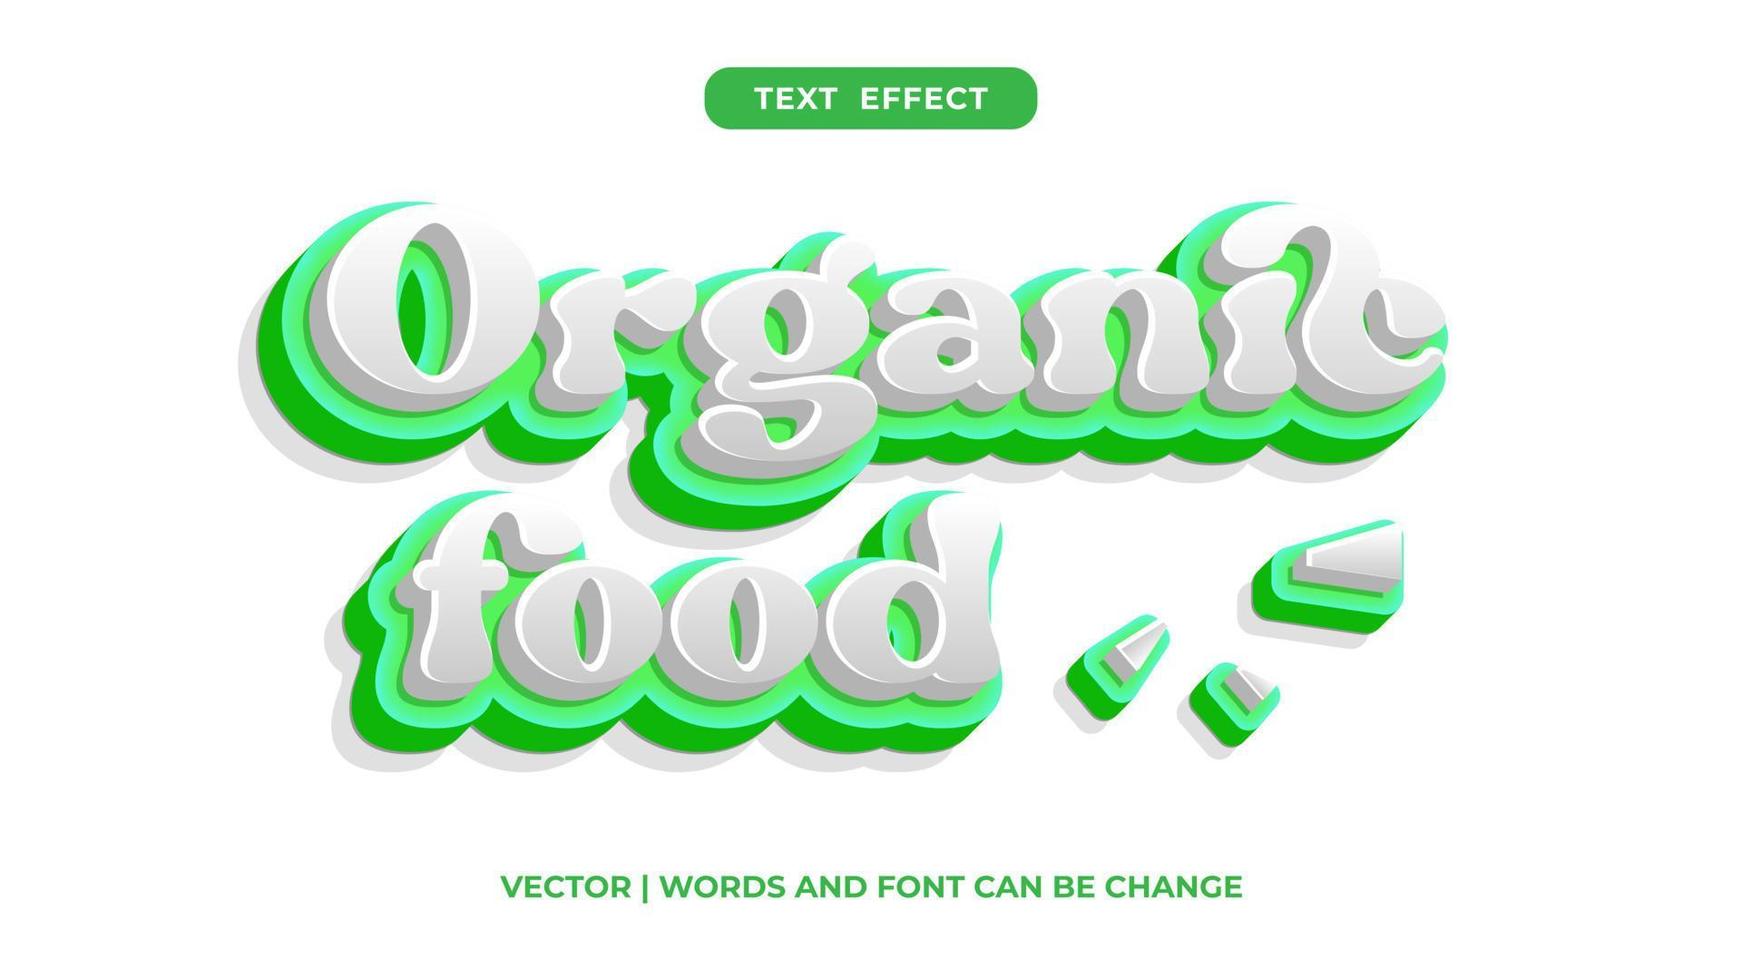 Text effects for Organic food, editable text. vector